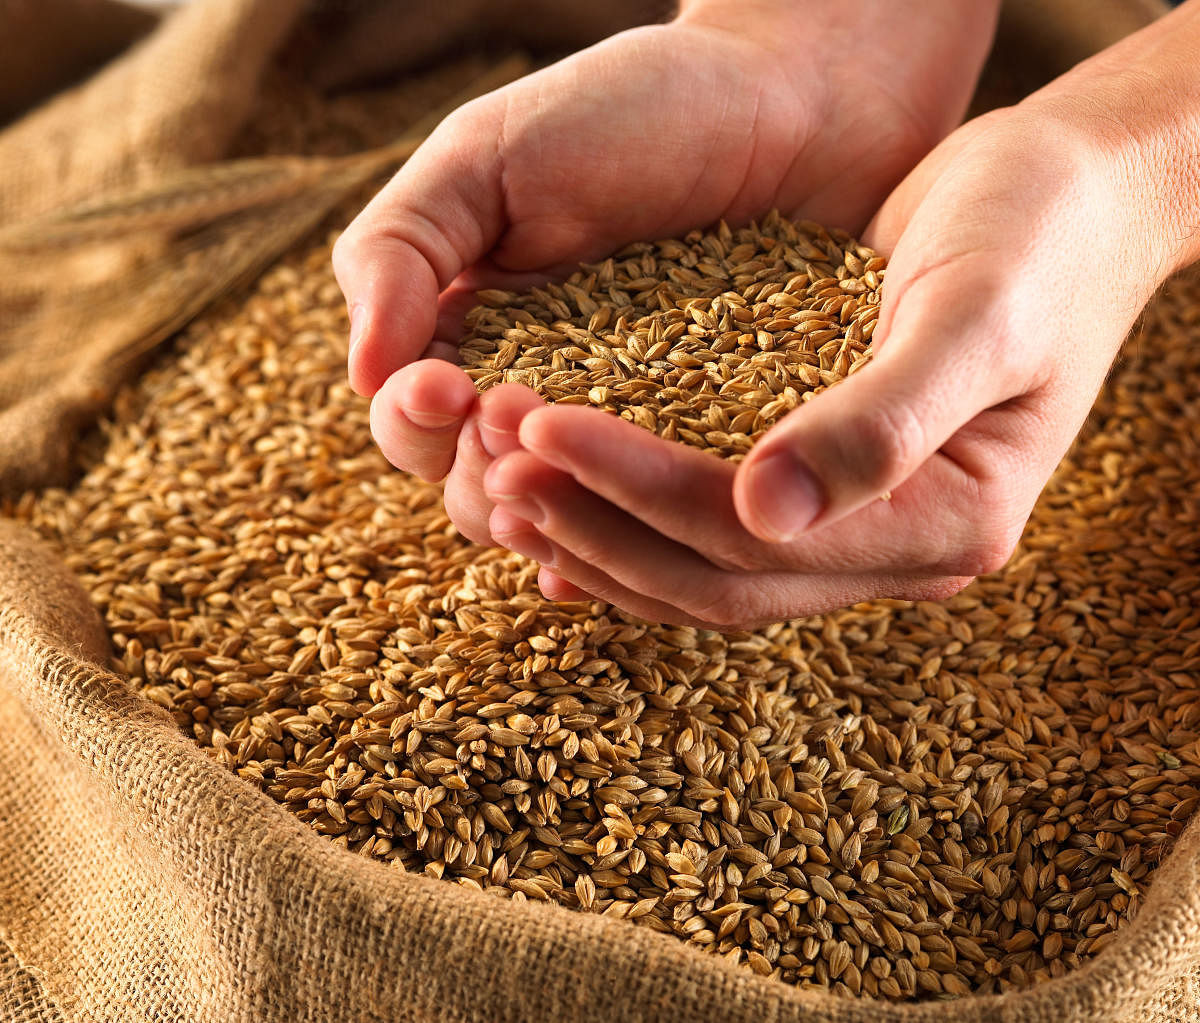 Govt expects to achieve foodgrain target for 2019-20